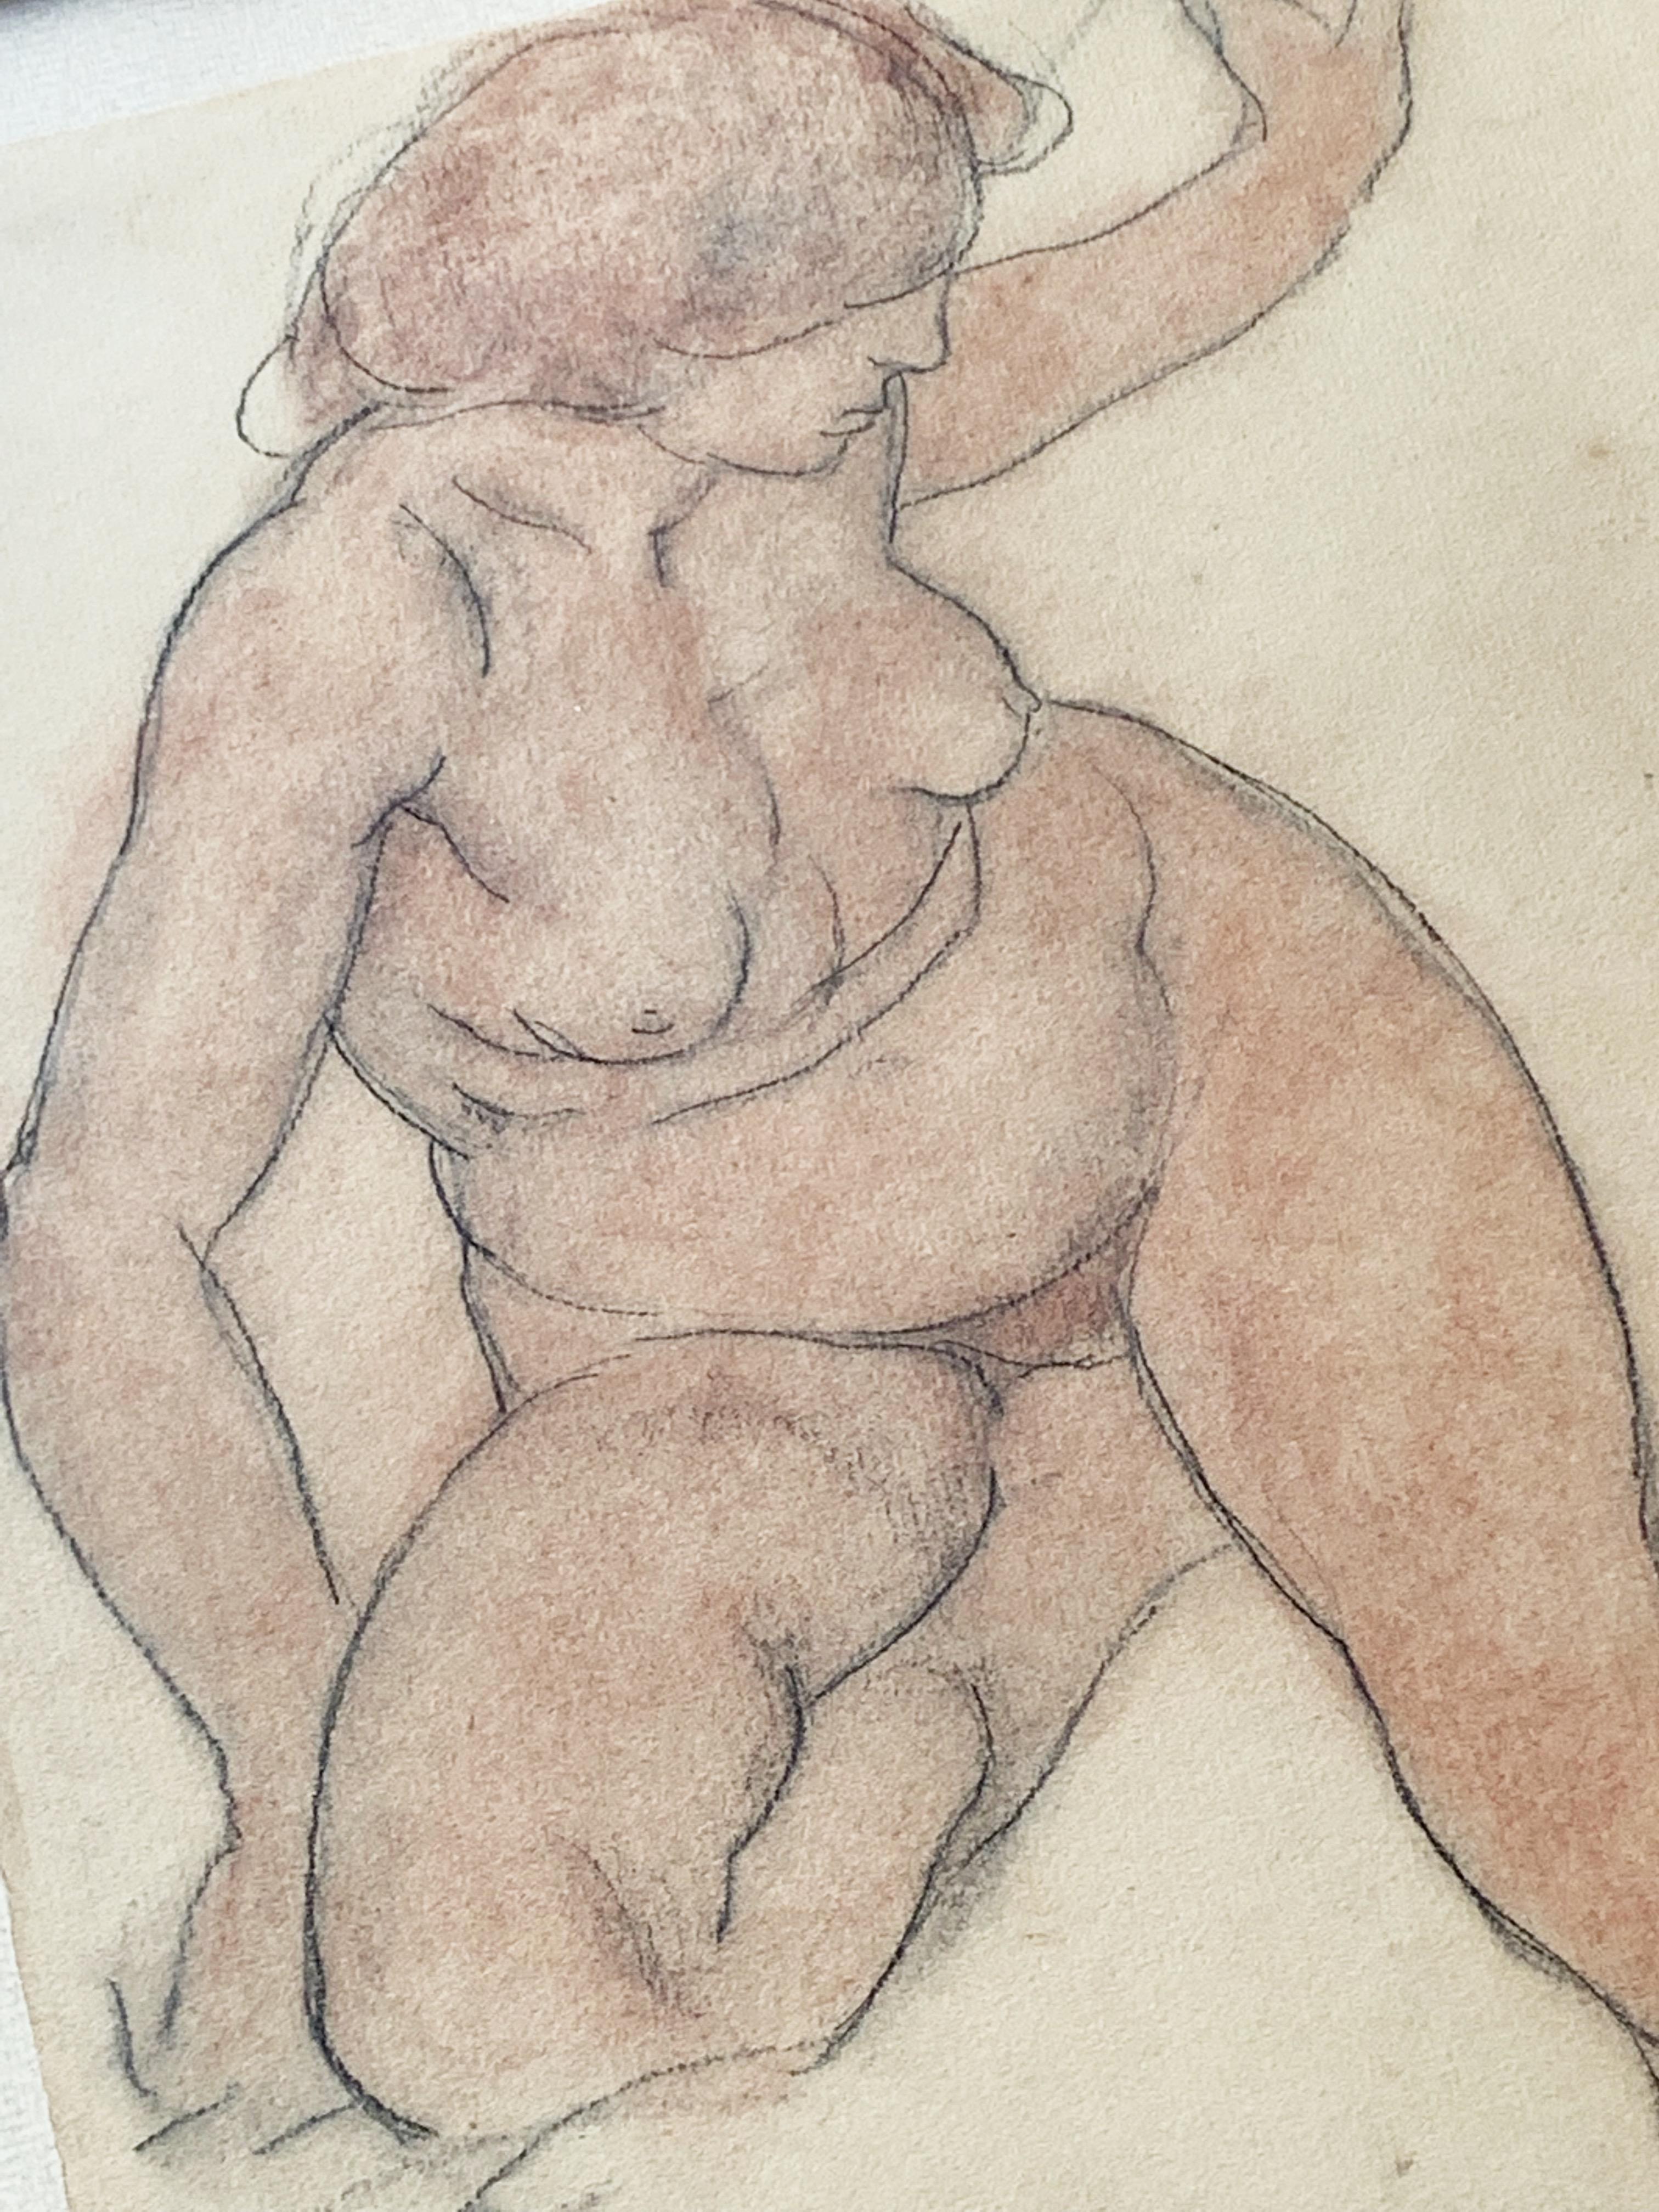 Léon-Ernest Drivier (1878-1951)
Female nude
Black stone and red chalk on paper
Signed lower left
31 x 23.5 cm
Provenance: former collection of Marie de Rohan Chabot, Princess Murat, then by descent
Minor stains

Born in Grenoble, Léon-Ernest Drivier